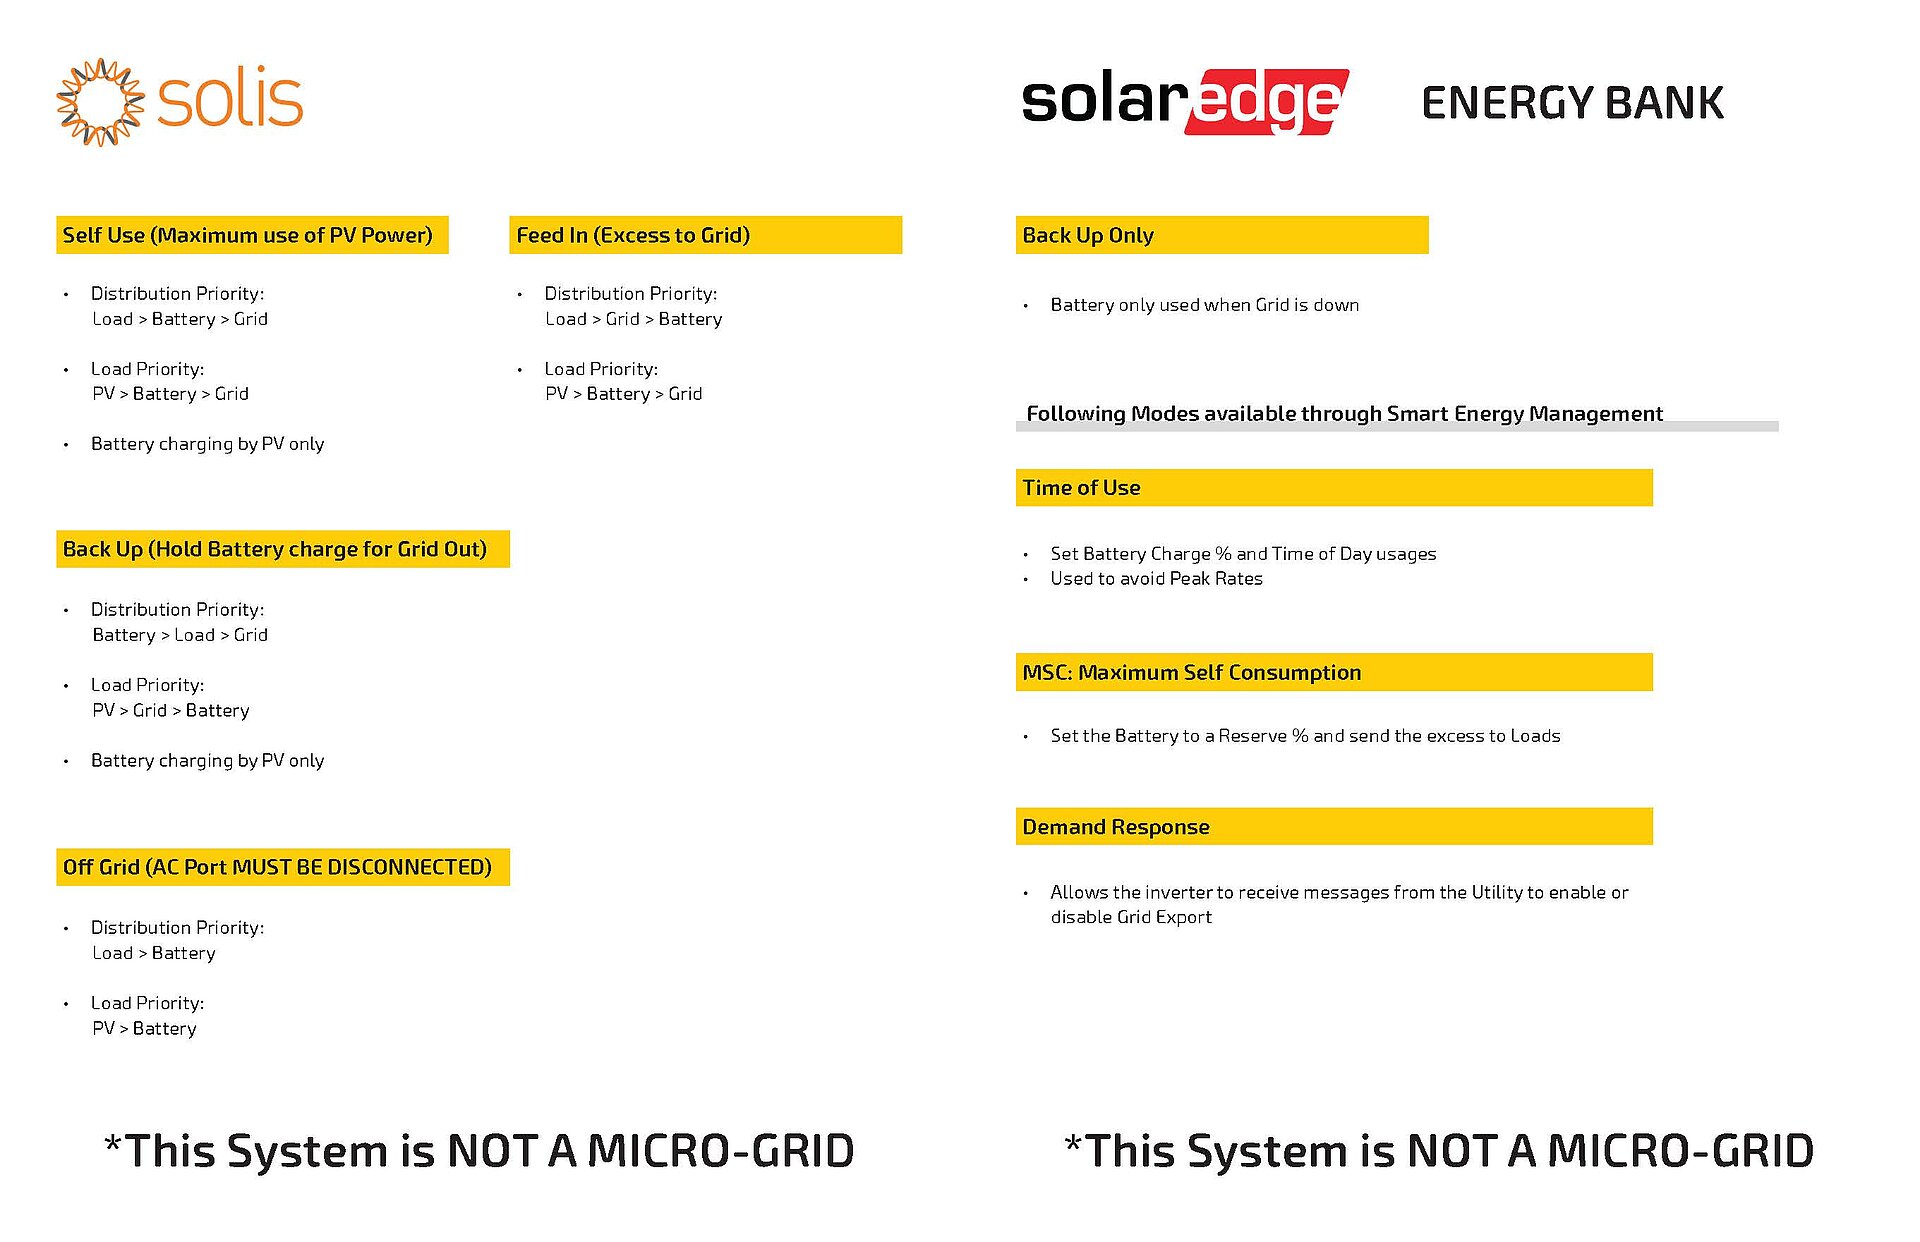 solis-pv-self-use-maximum-power-back-up-hold-battery-charge-off-grid-feed-in-solaredge-energy-bank-time-use-demand-response